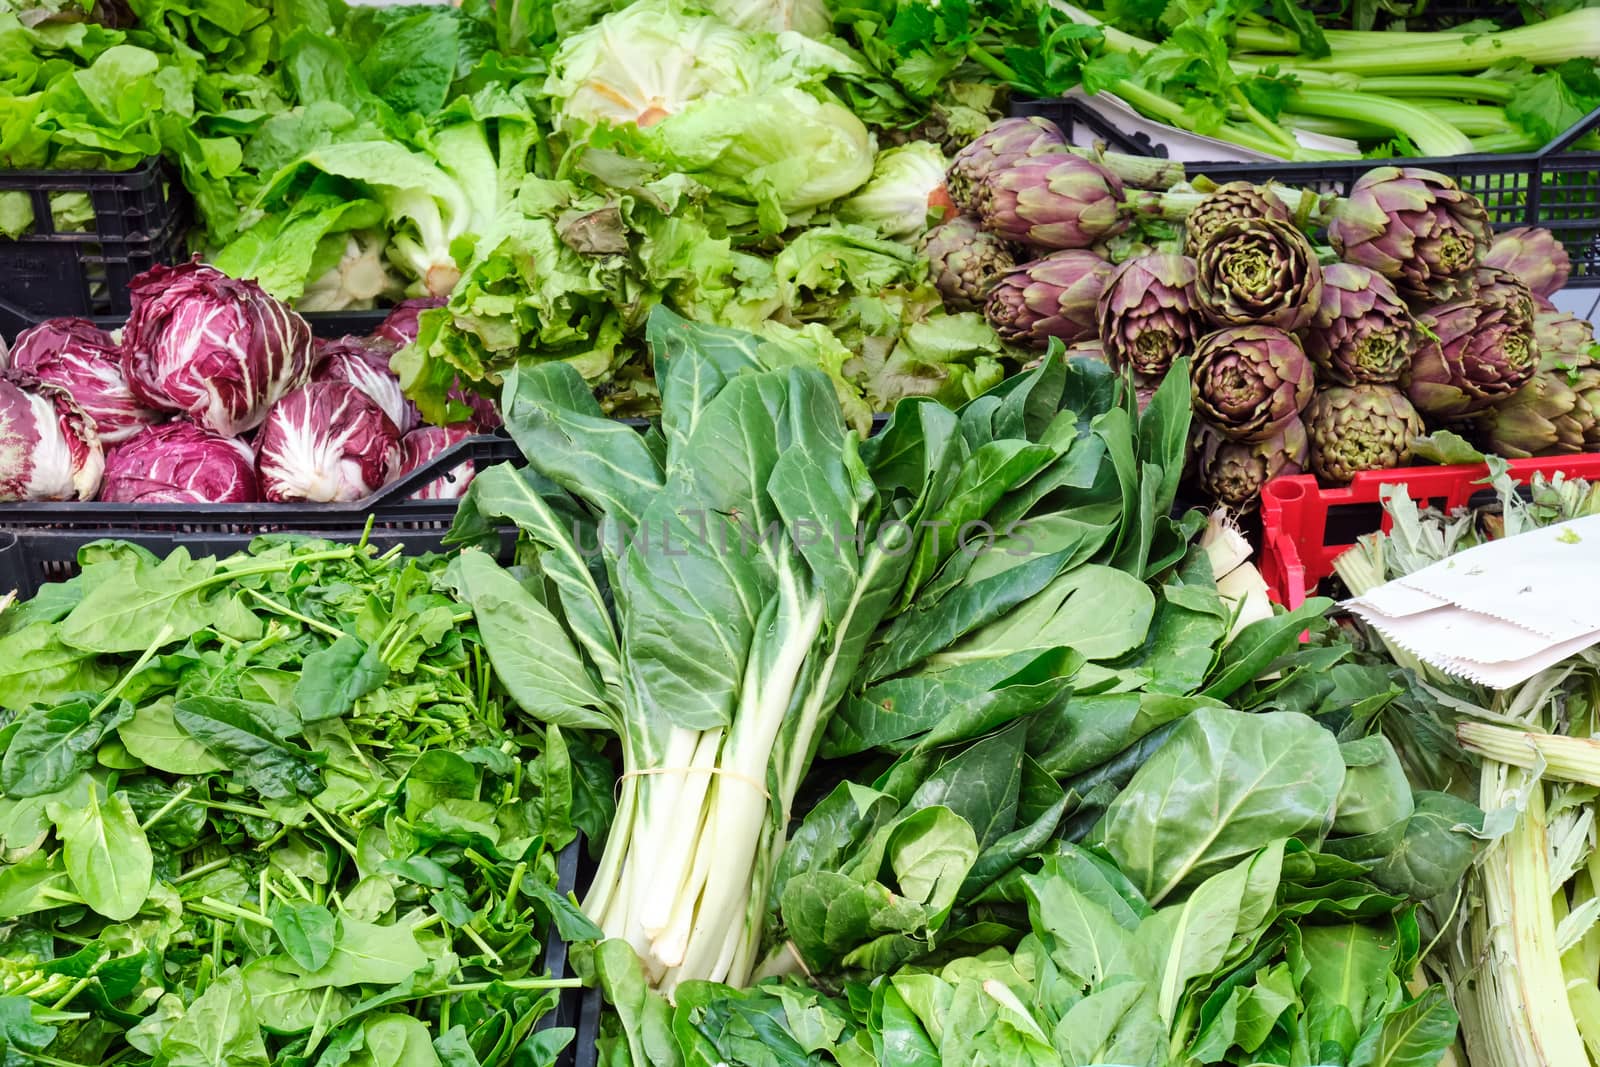 Salad, artichokes and herbs for sale at a market